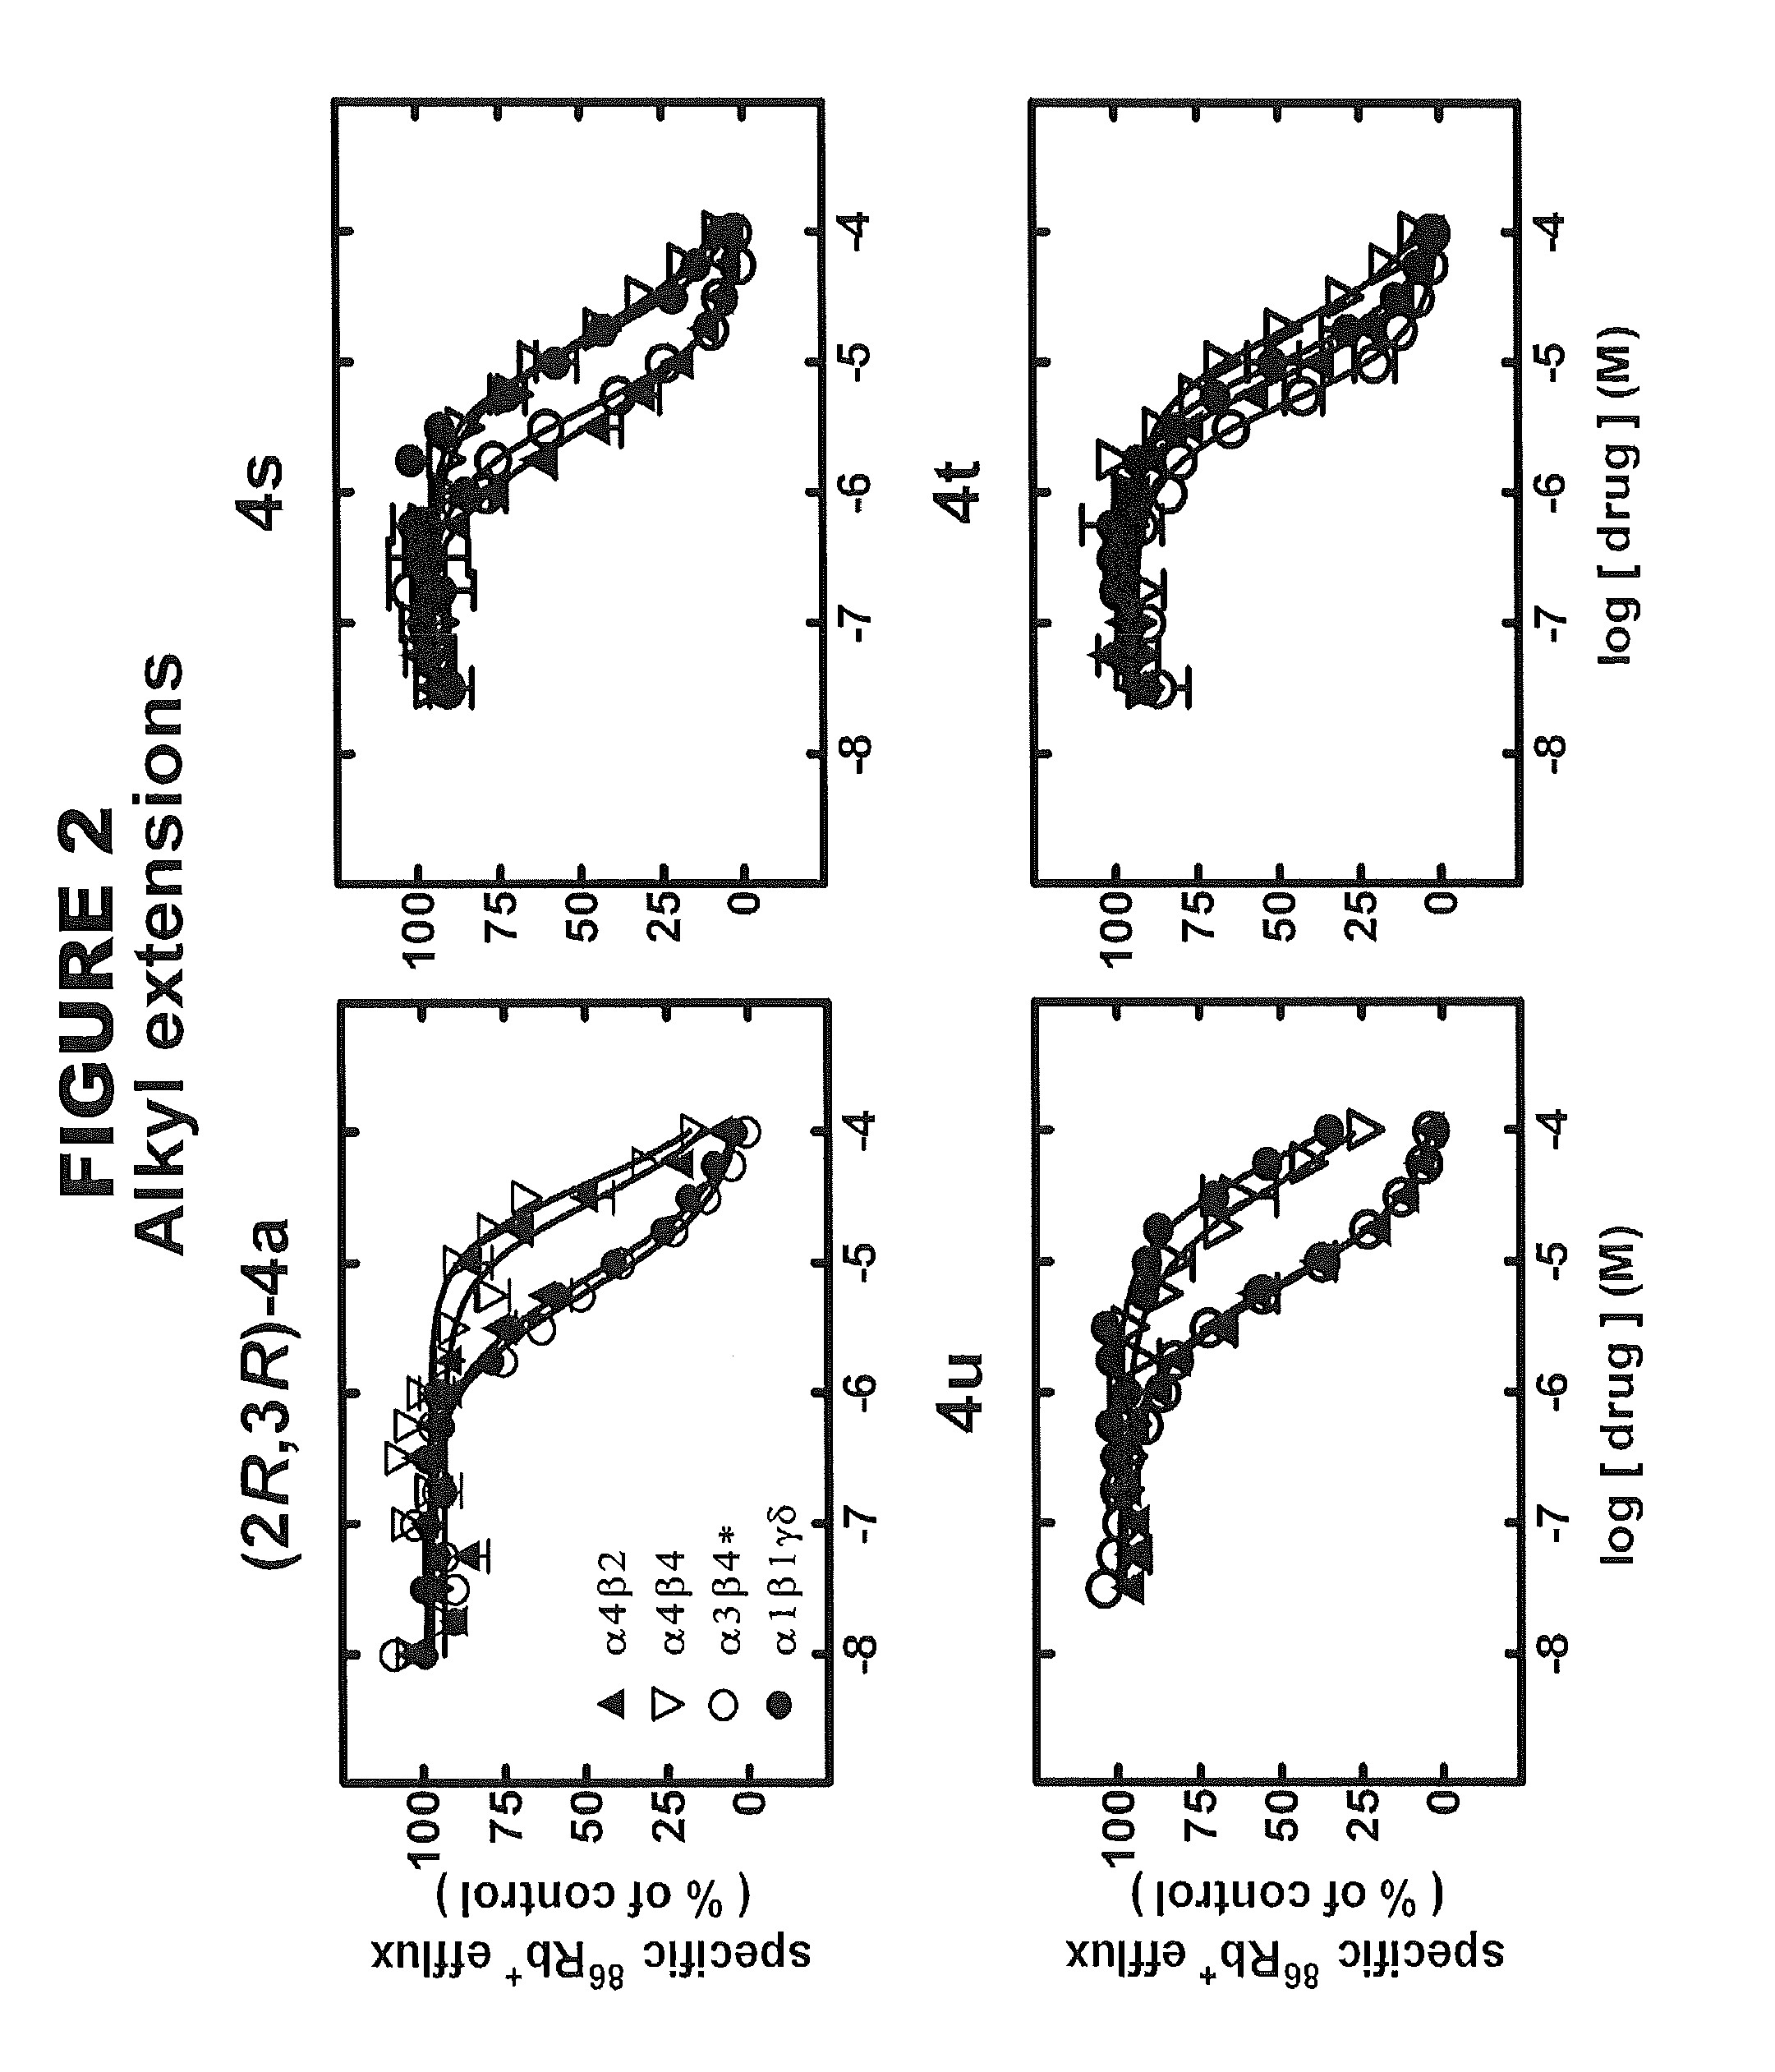 Hydroxybupropion analogues for treating drug dependence